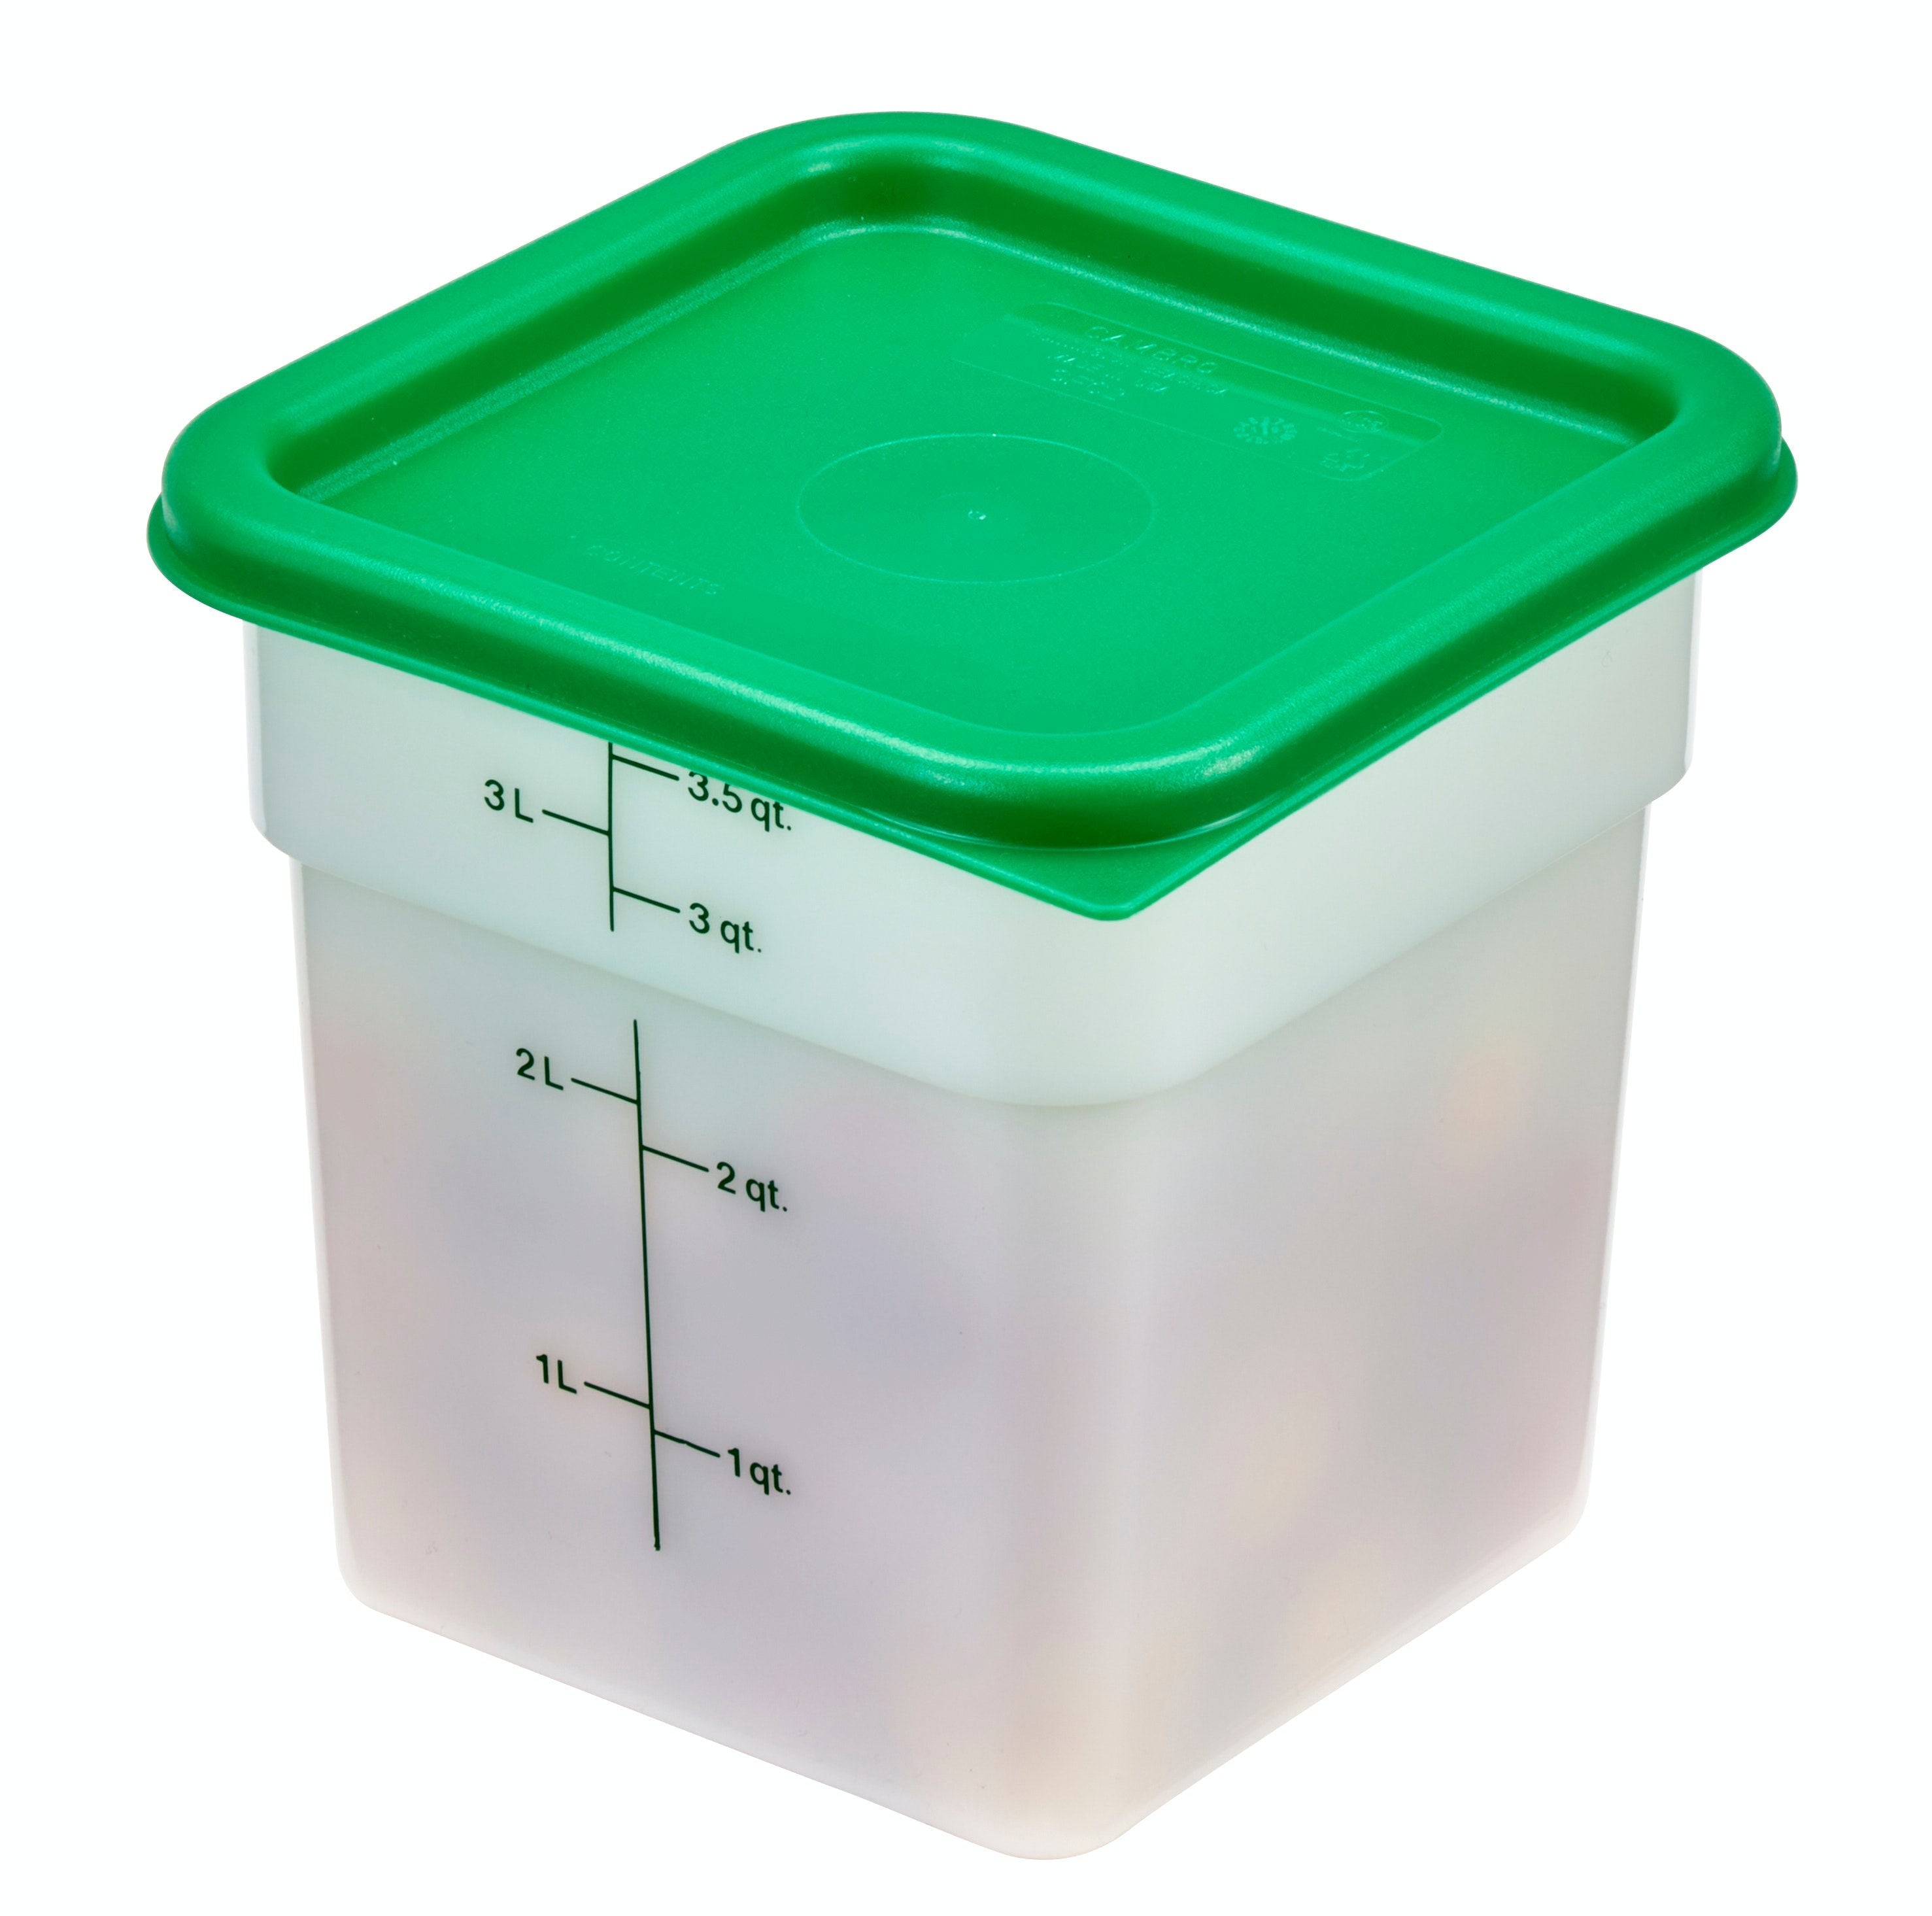 Cambro Round 4 Quart Food Storage Container with Lid, 3-count